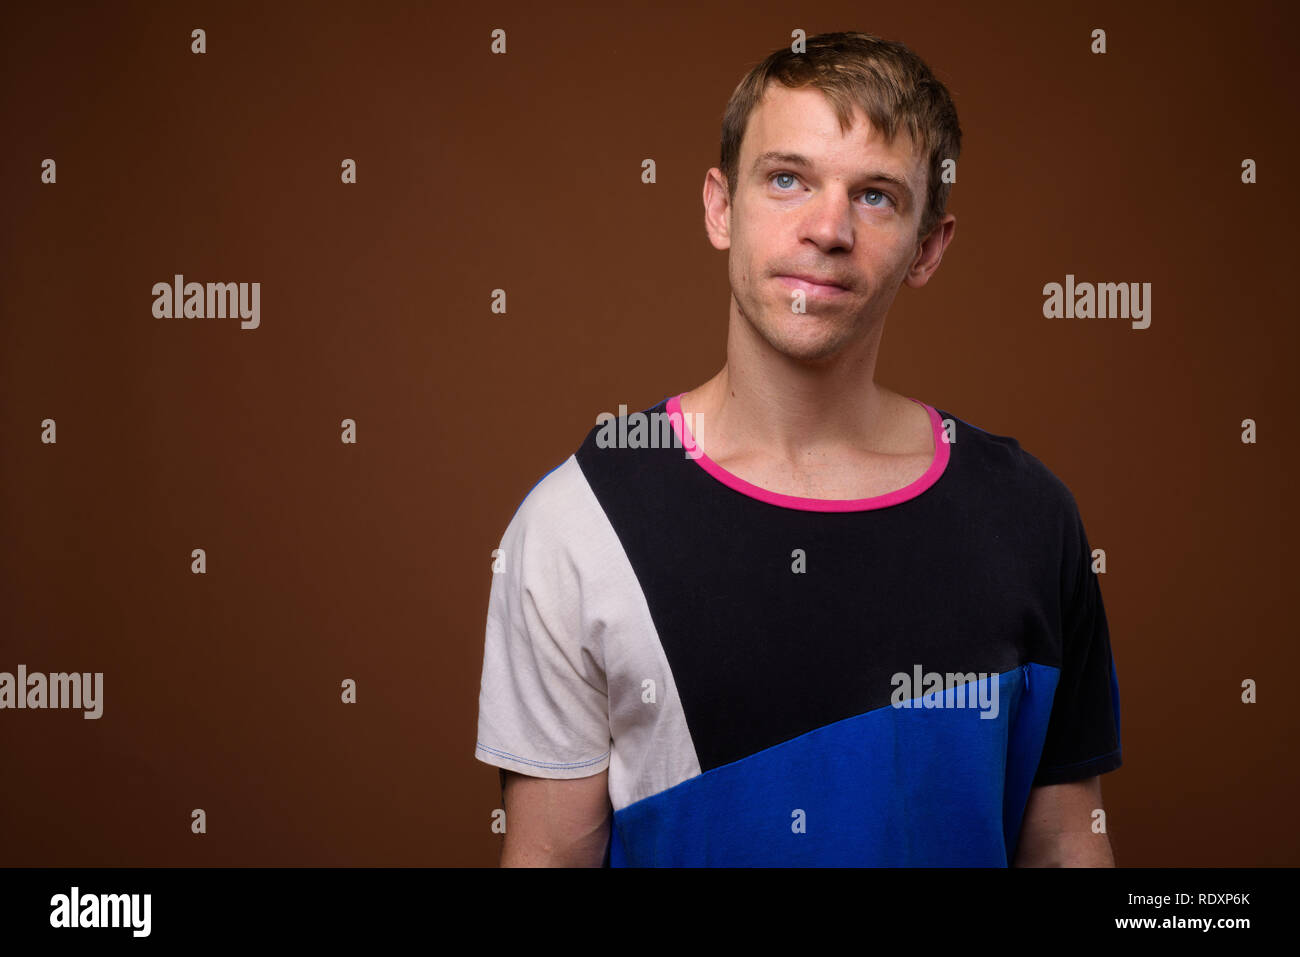 Man wearing blue shirt against brown background Stock Photo